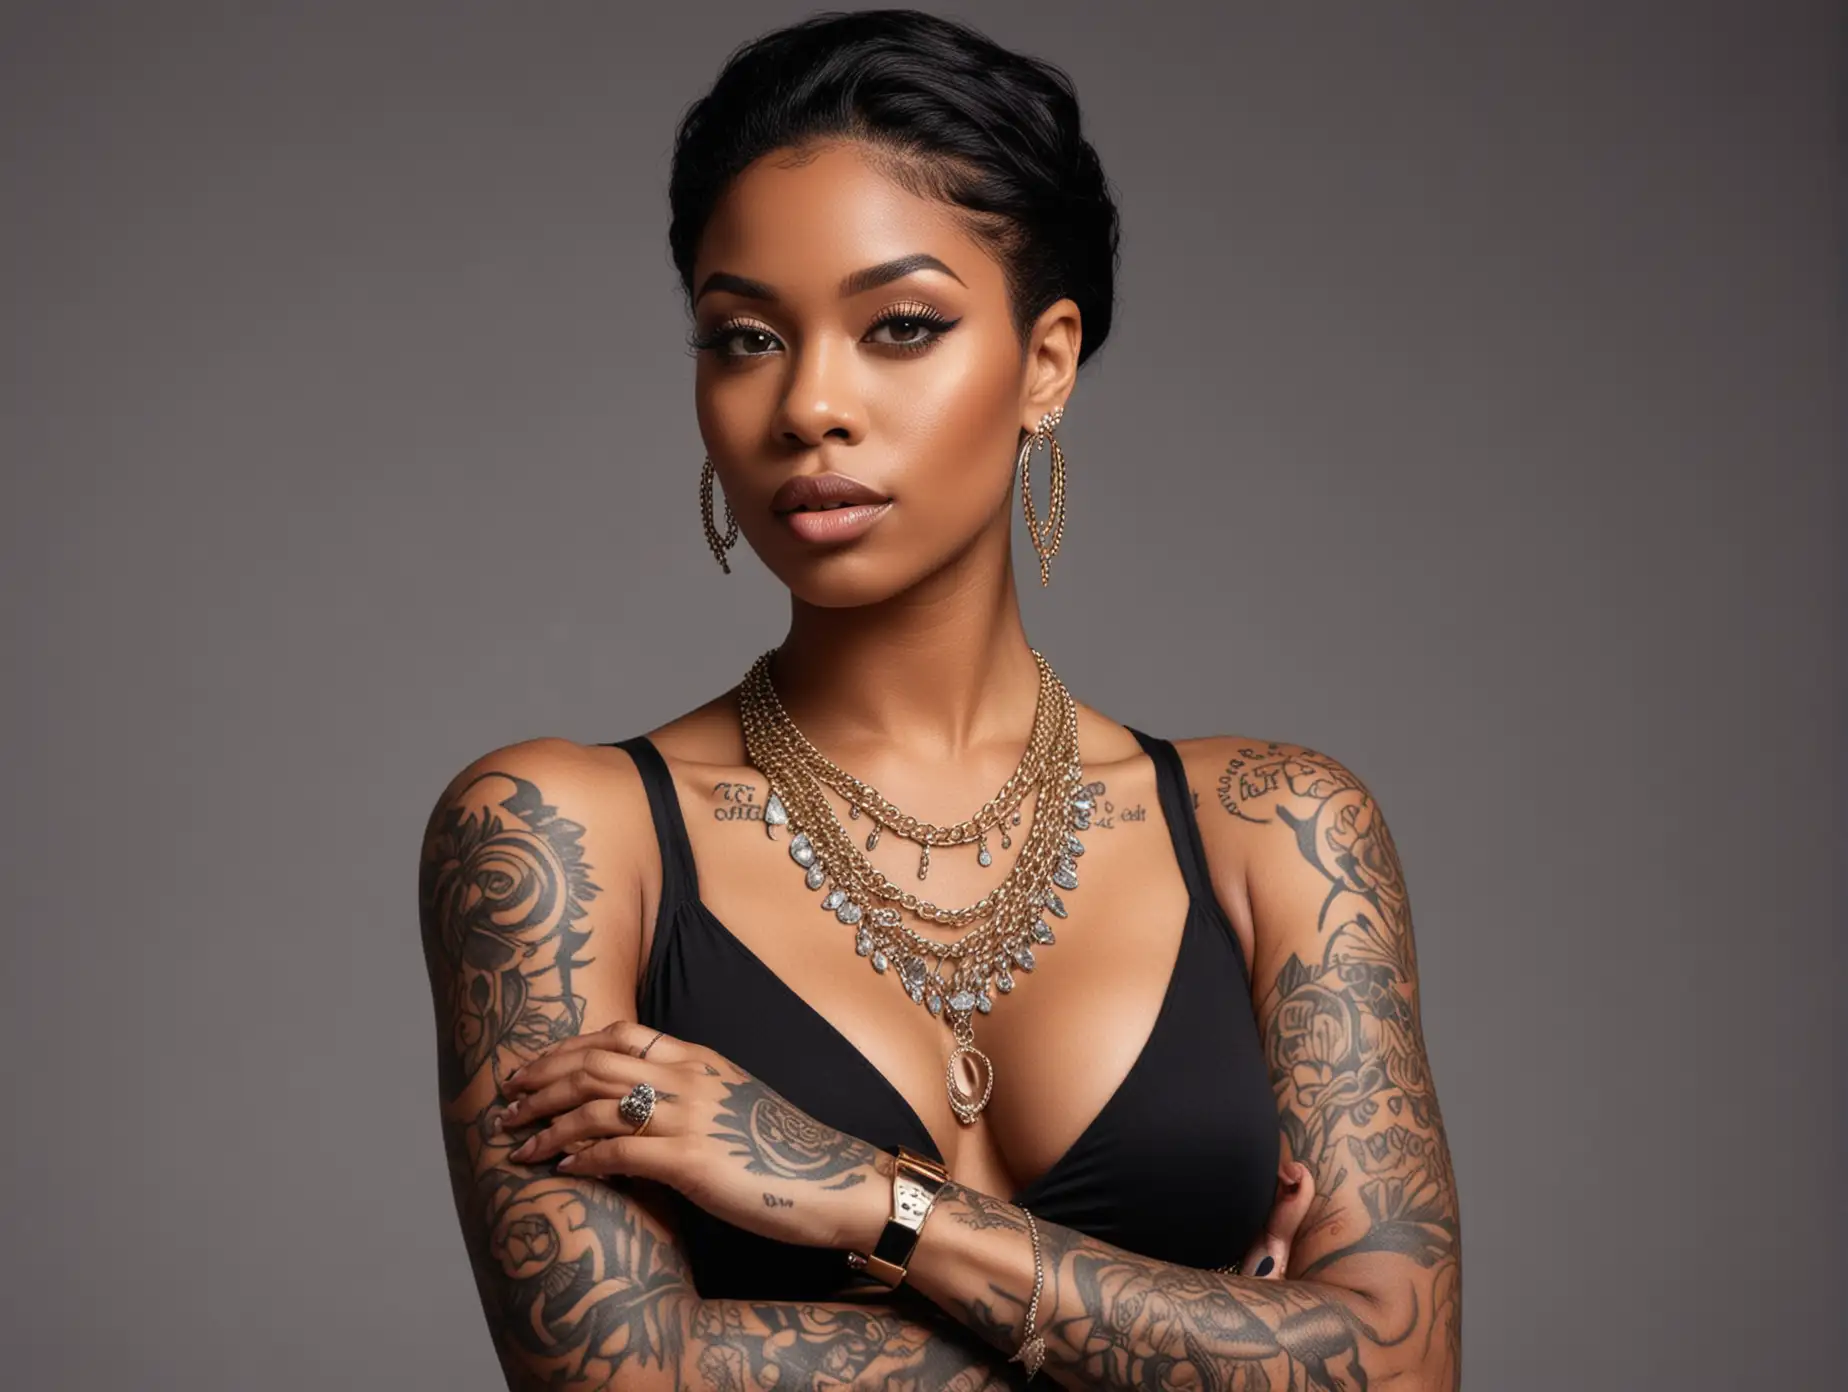 sexy rich black woman, 27 year old, with tattoos, expensive jewelry, standing